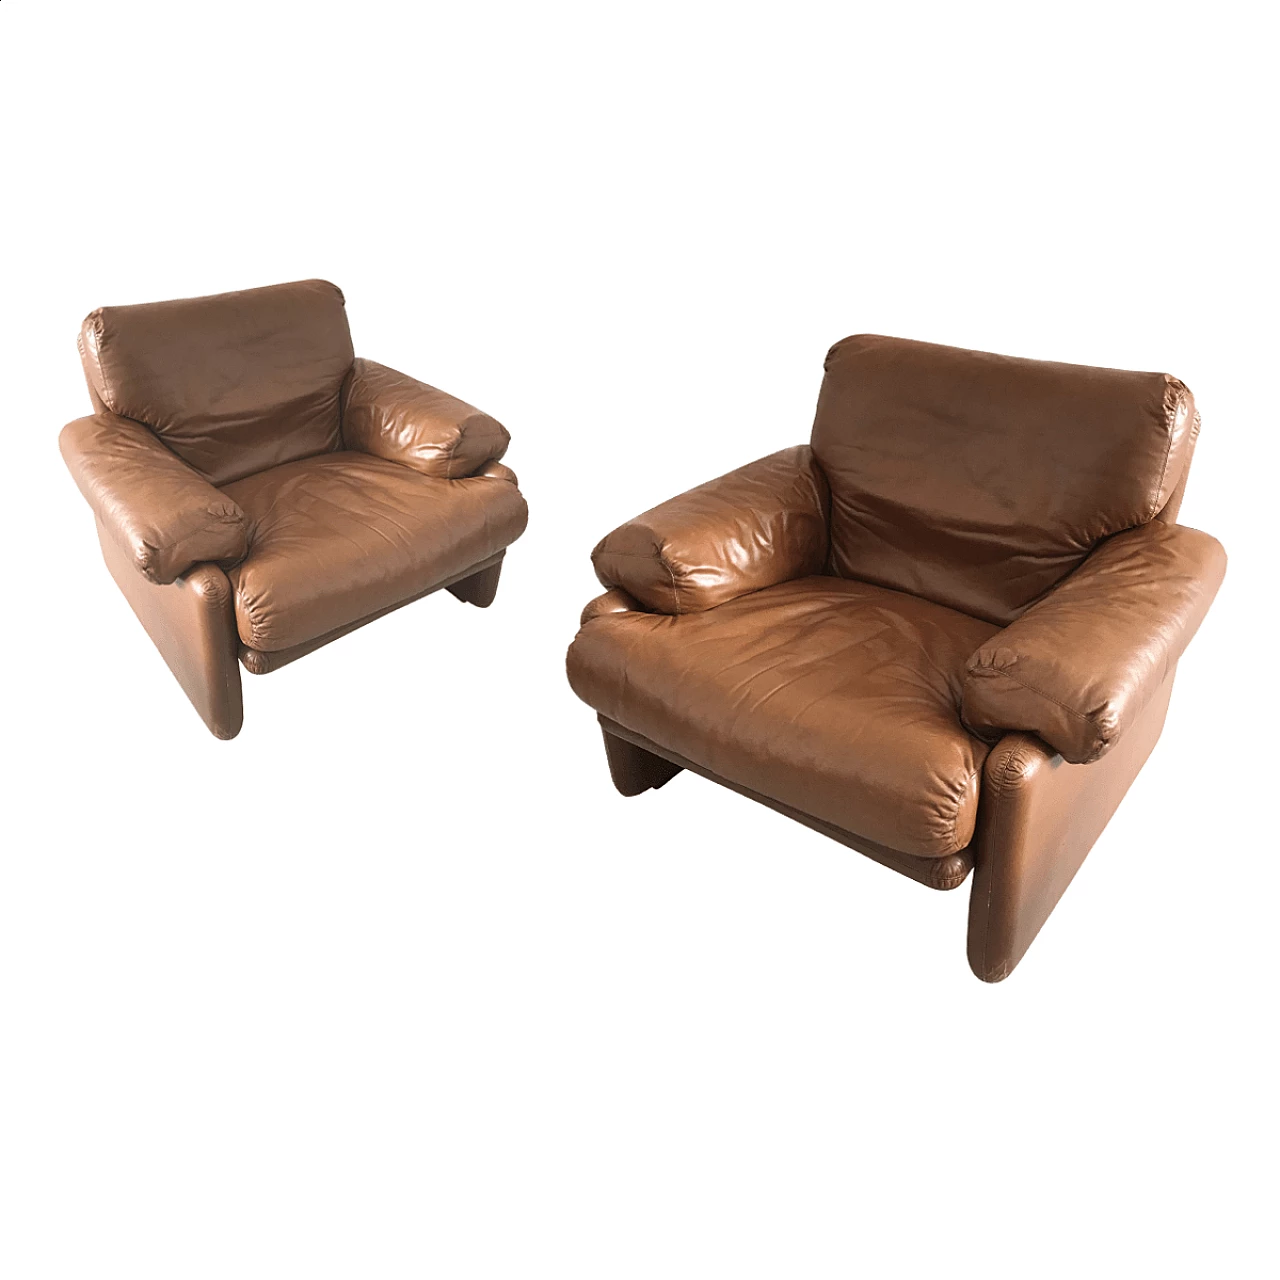 Pair of leather armchairs "Coronado" by Afra and Tobia Scarpa for B&B Italia 1060186